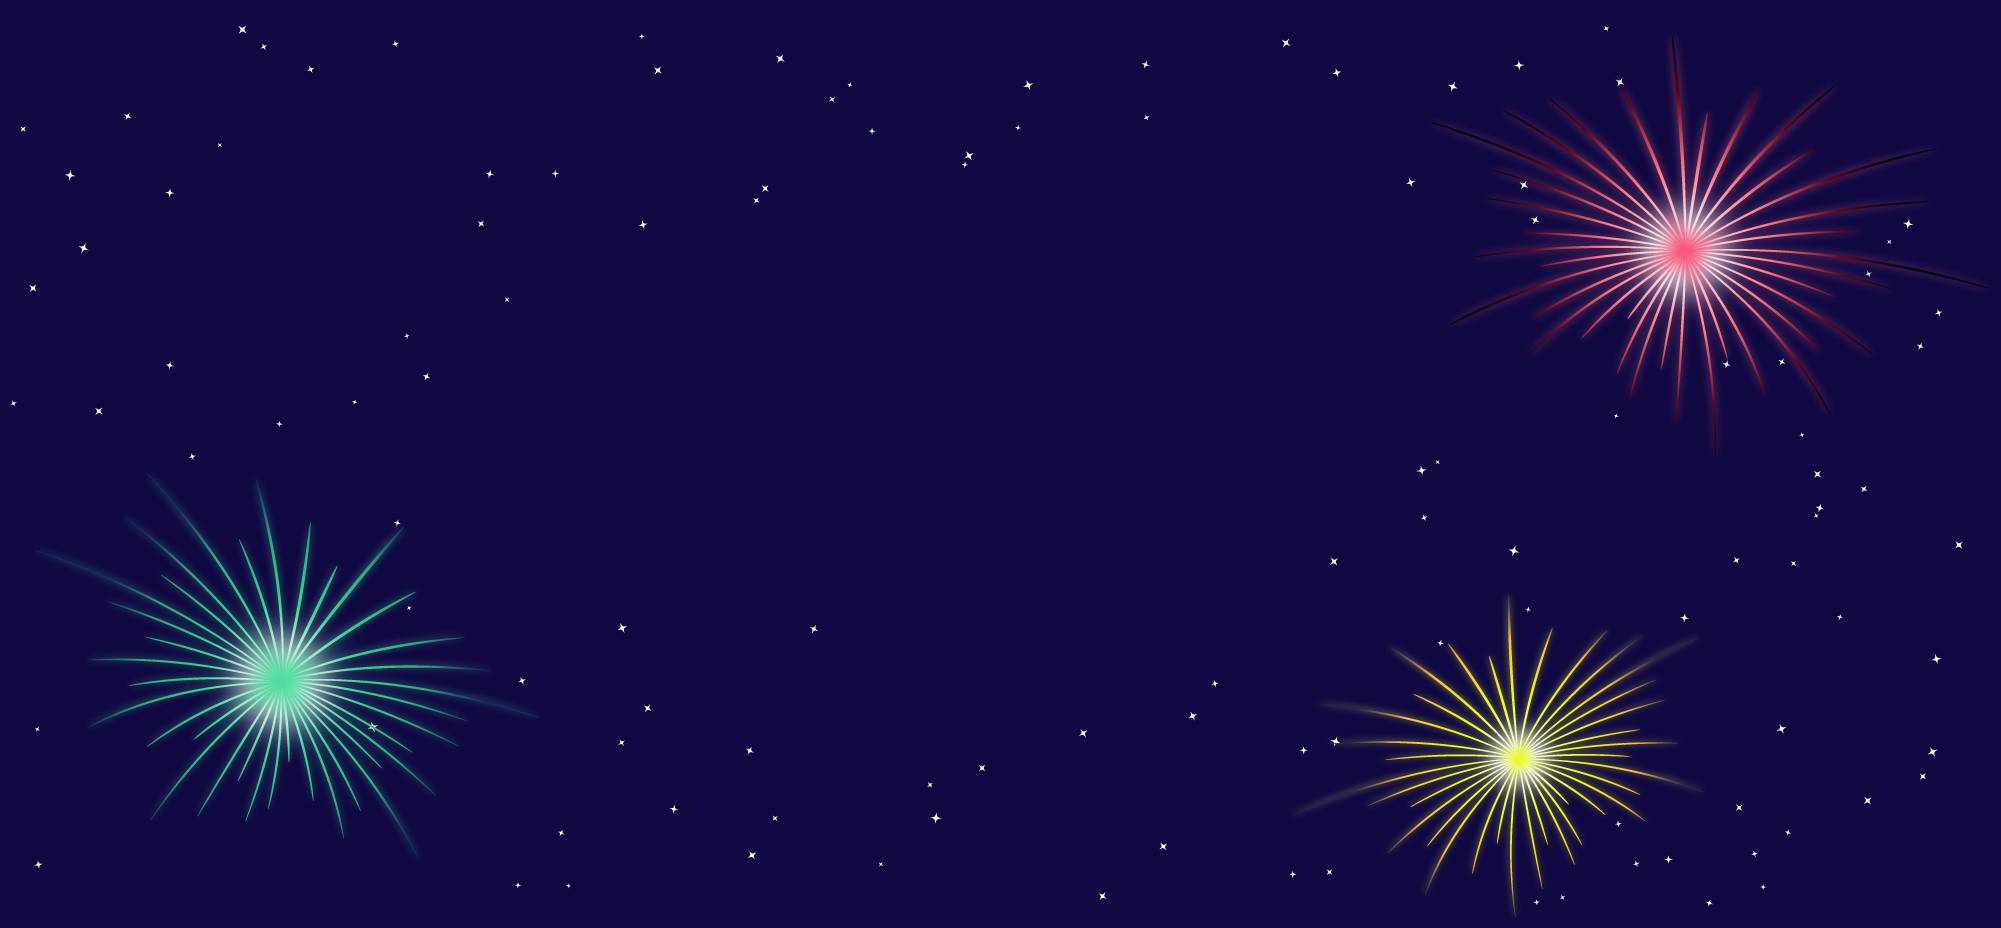 A full-page image with colorful fireworks and stars in a night sky.